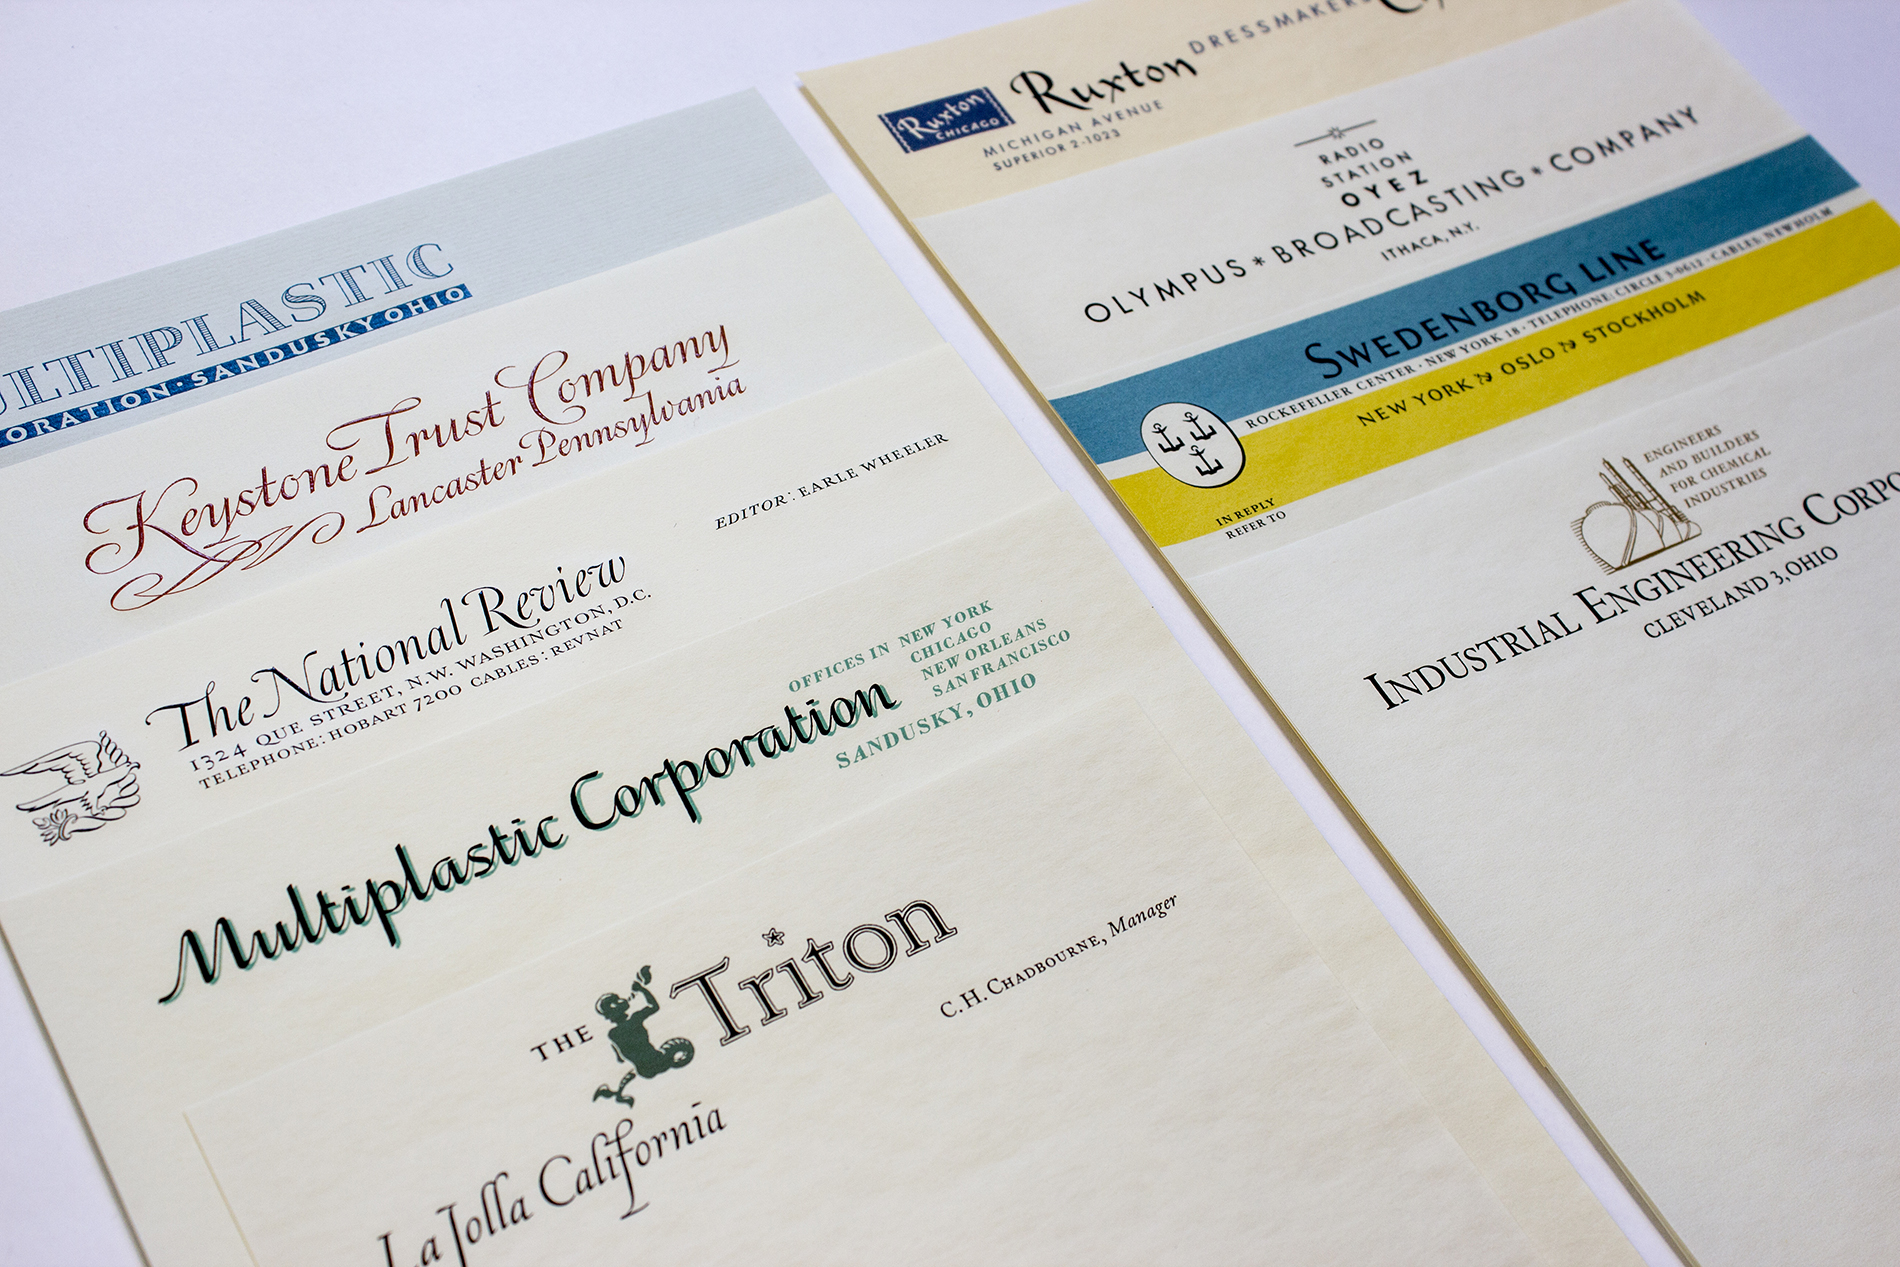 Close-up of letterhead samples from the publication